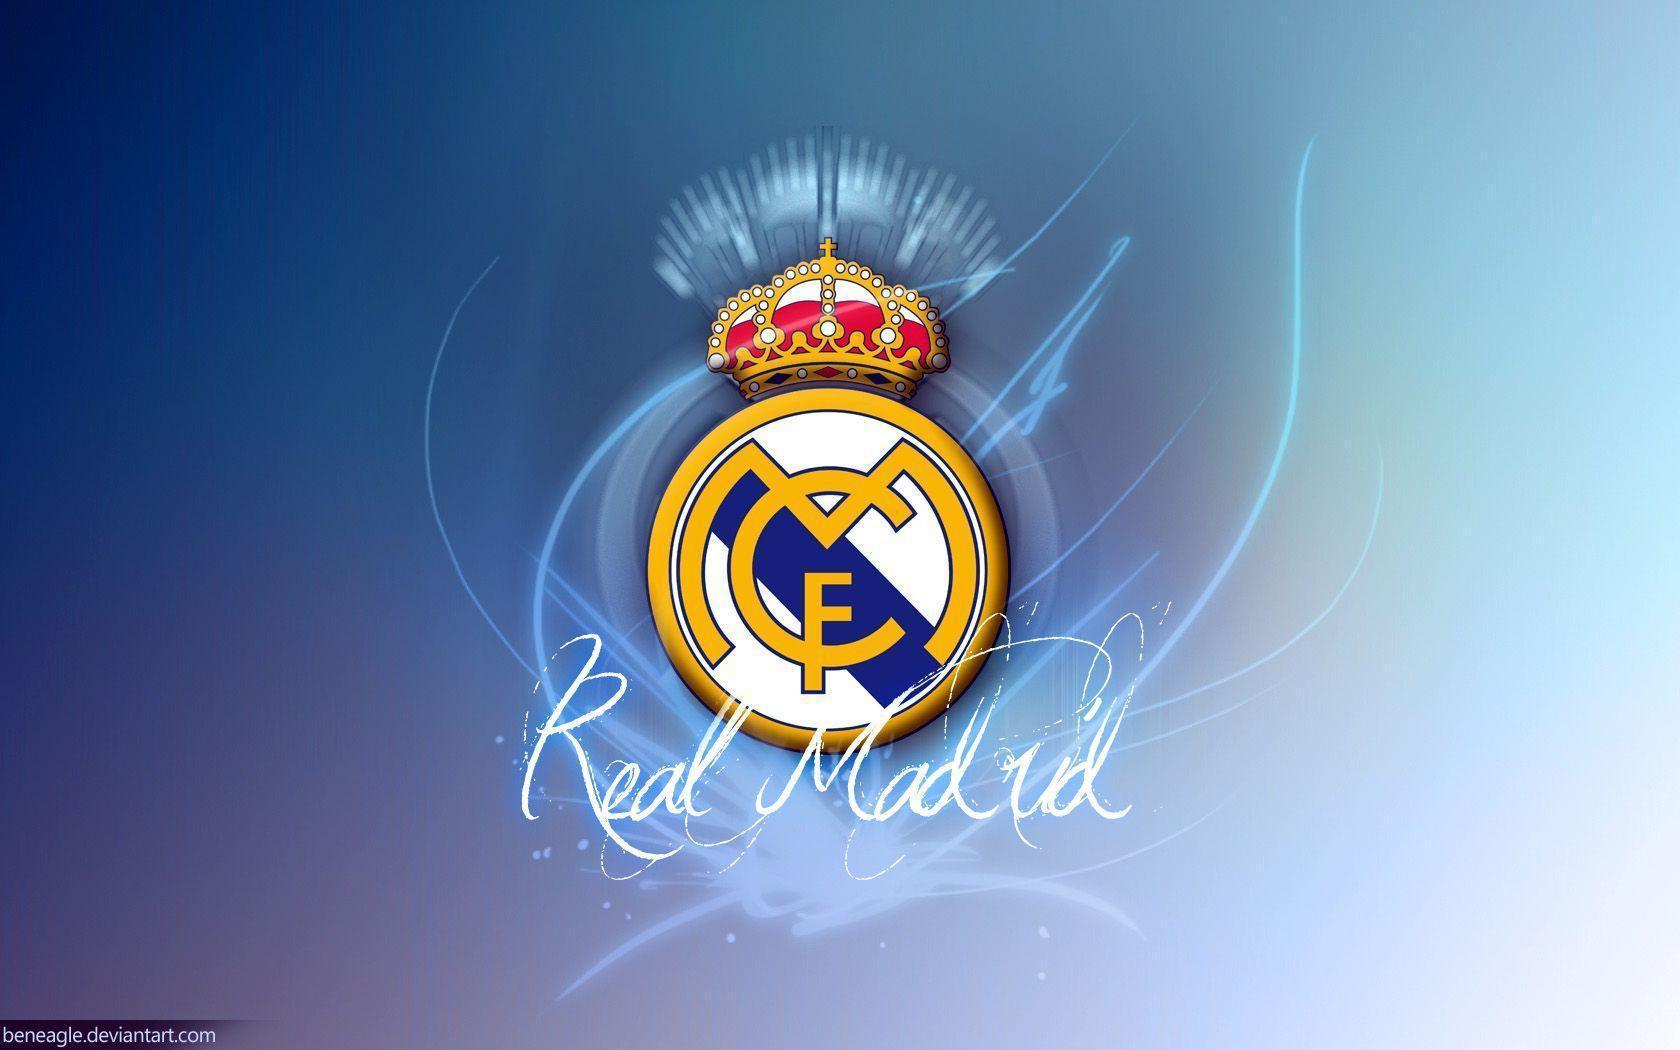 Real Madrid Wallpaper HD free download. Wallpaper, Background